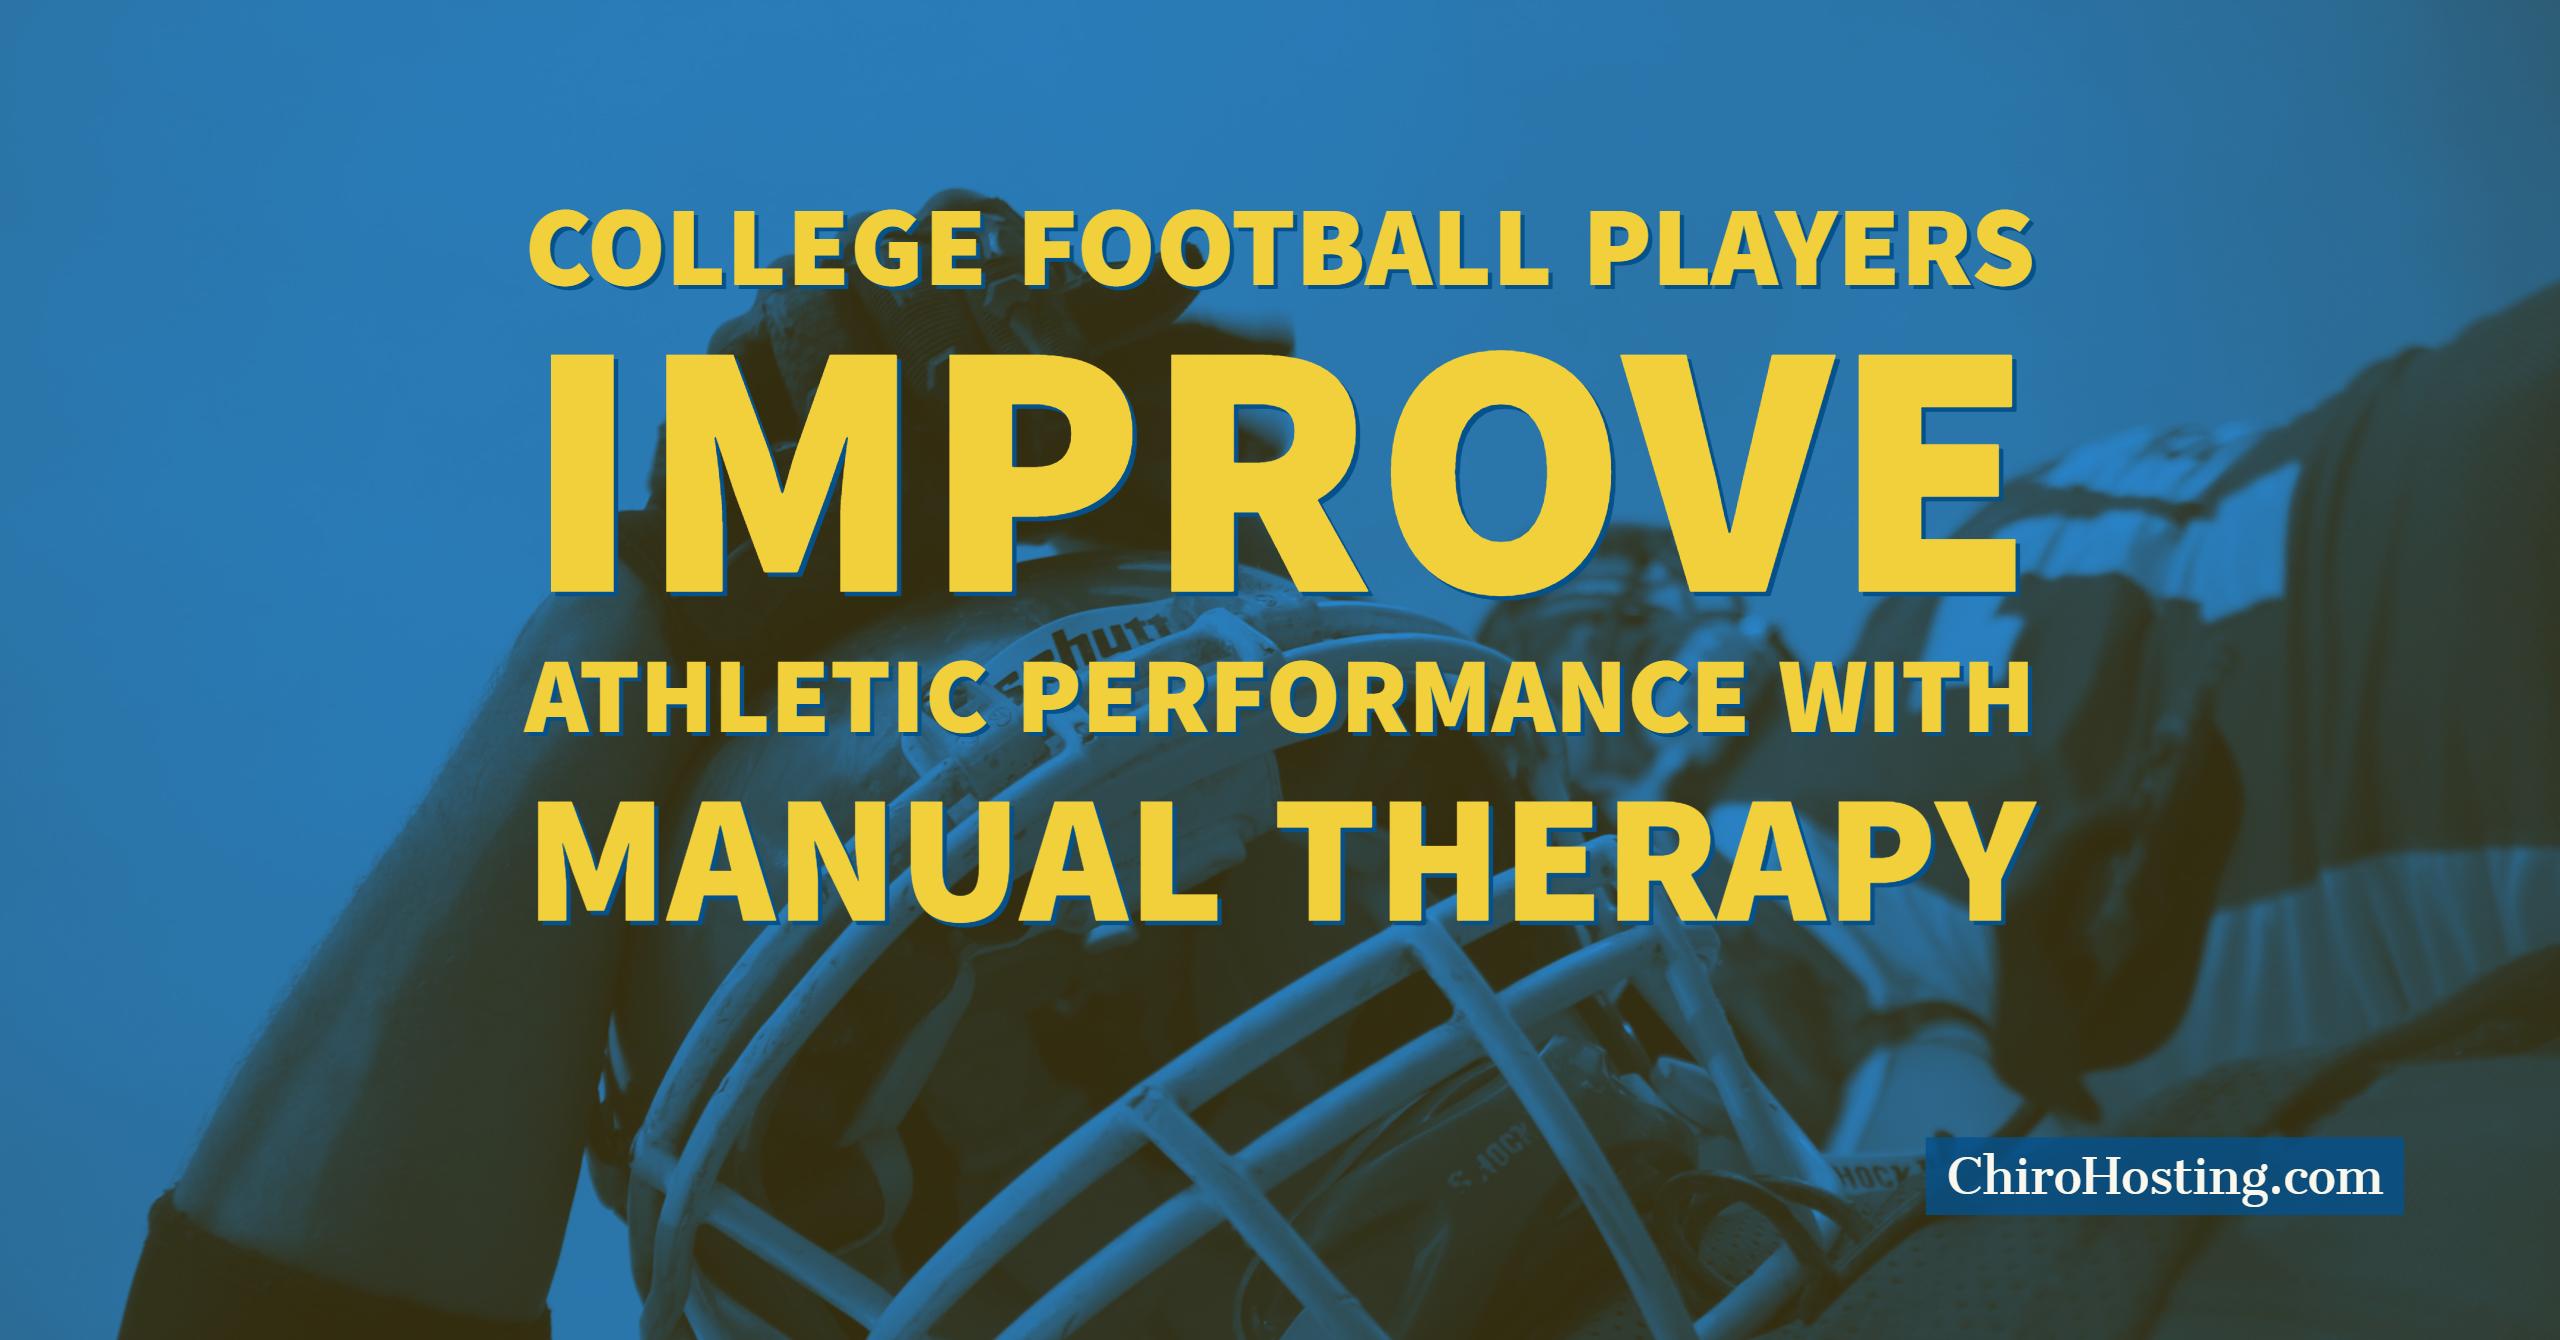 College Football Players Improve Athletic Performance with Manual Therapy